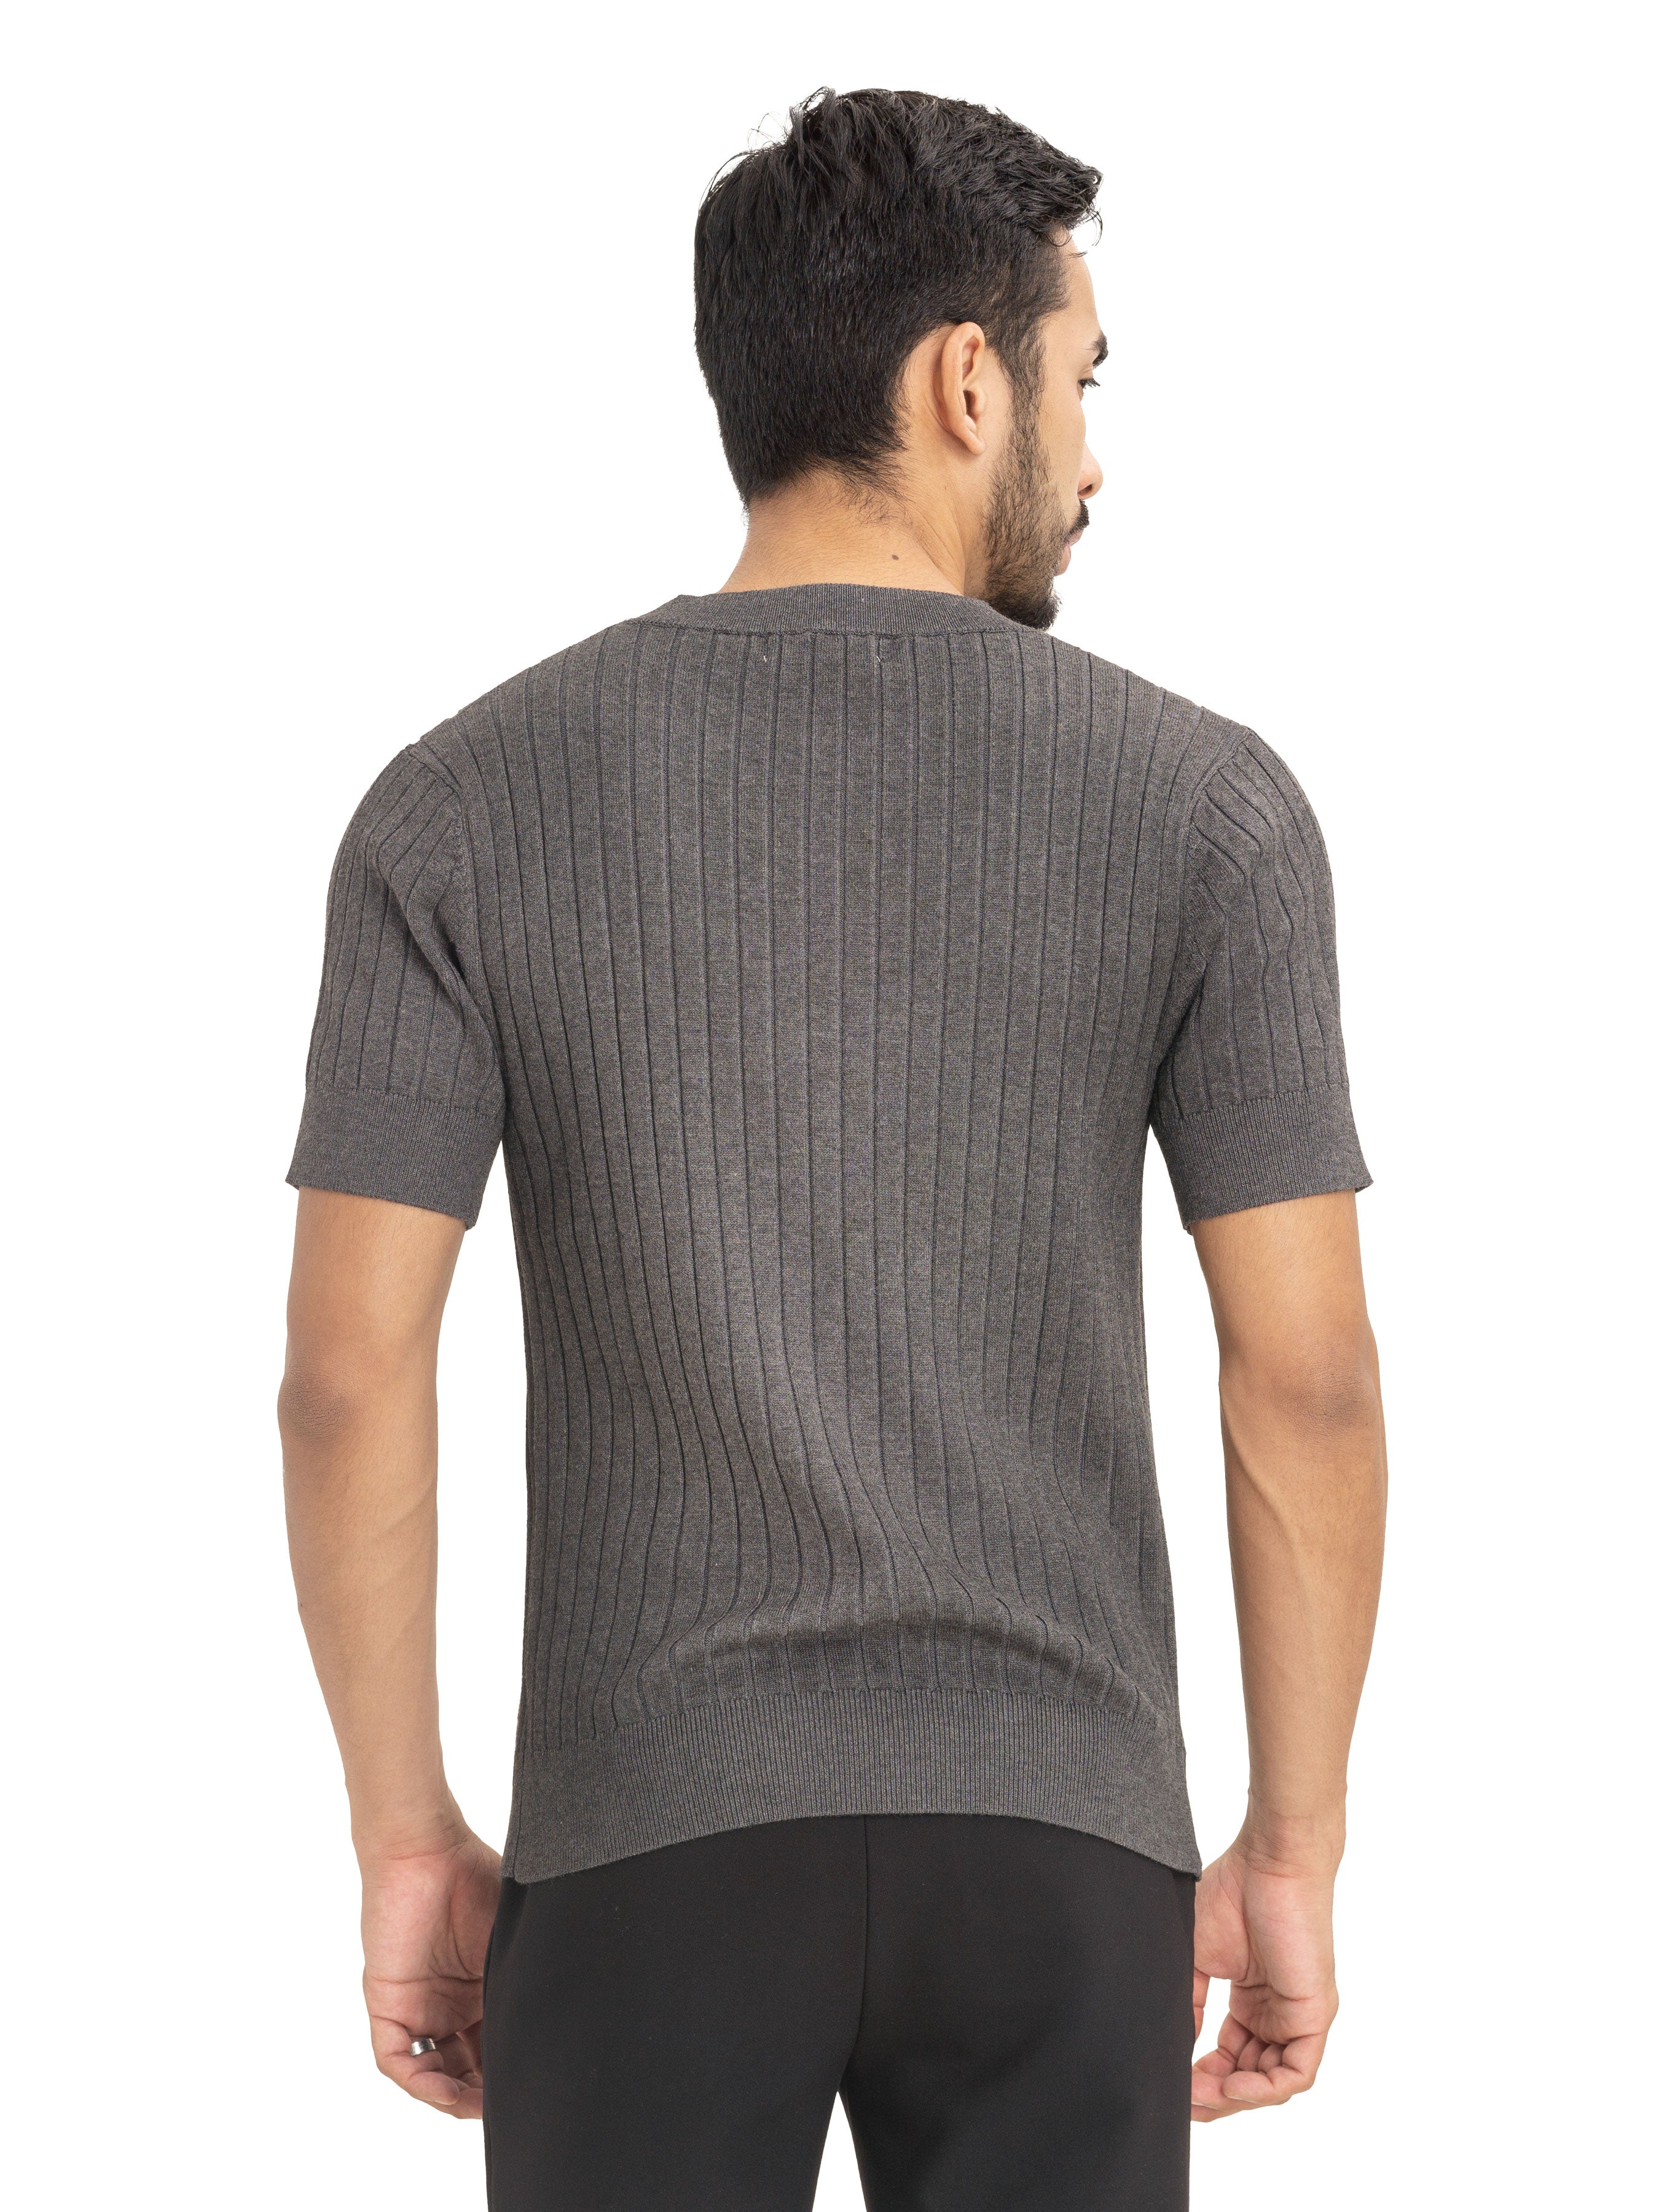 Ribbed Knit Tee - Dark Grey - Zeve Shoes